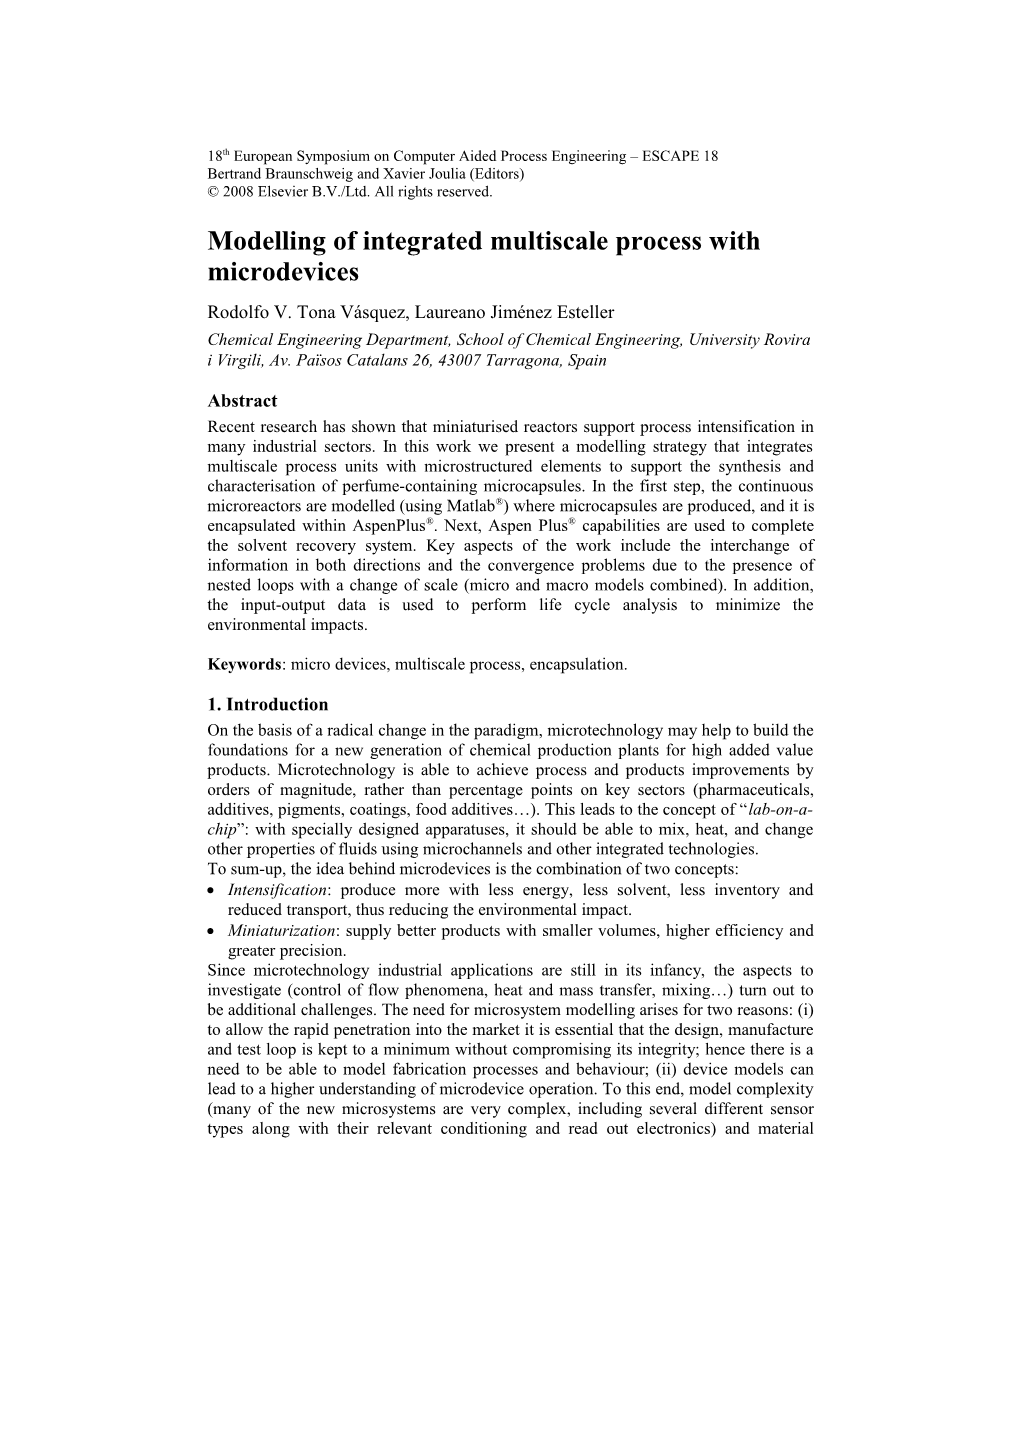 Modelling of Integrated Multiscale Process Units with Microdevices 1